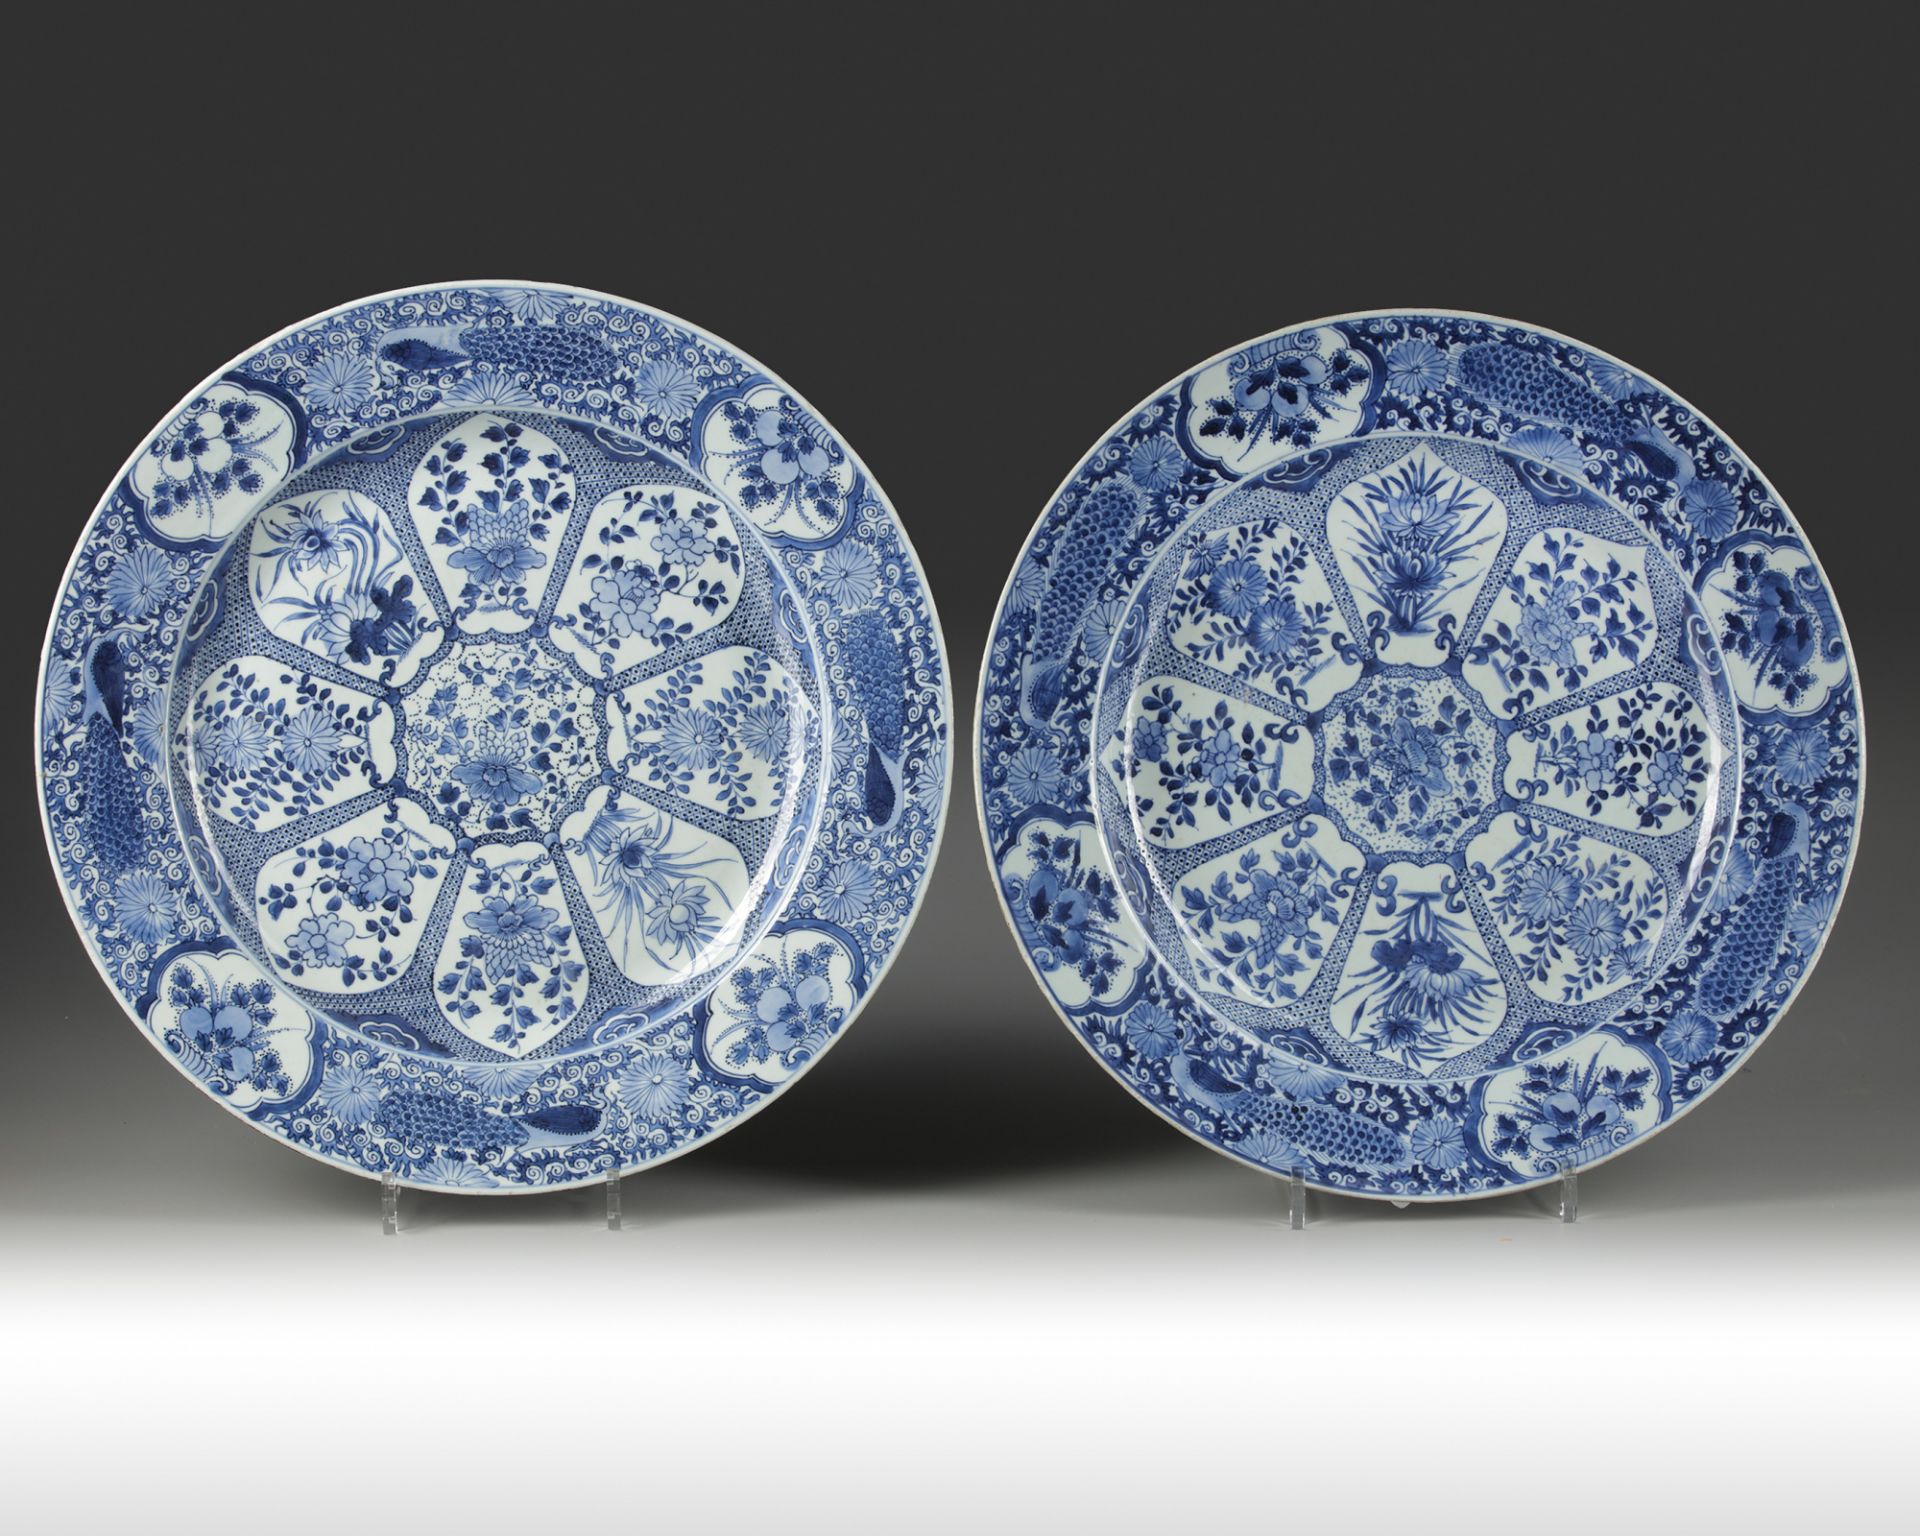 A PAIR OF LARGE CHINESE BLUE AND WHITE PEACOCK CHARGERS, KANGXI PERIOD (1662-1722)